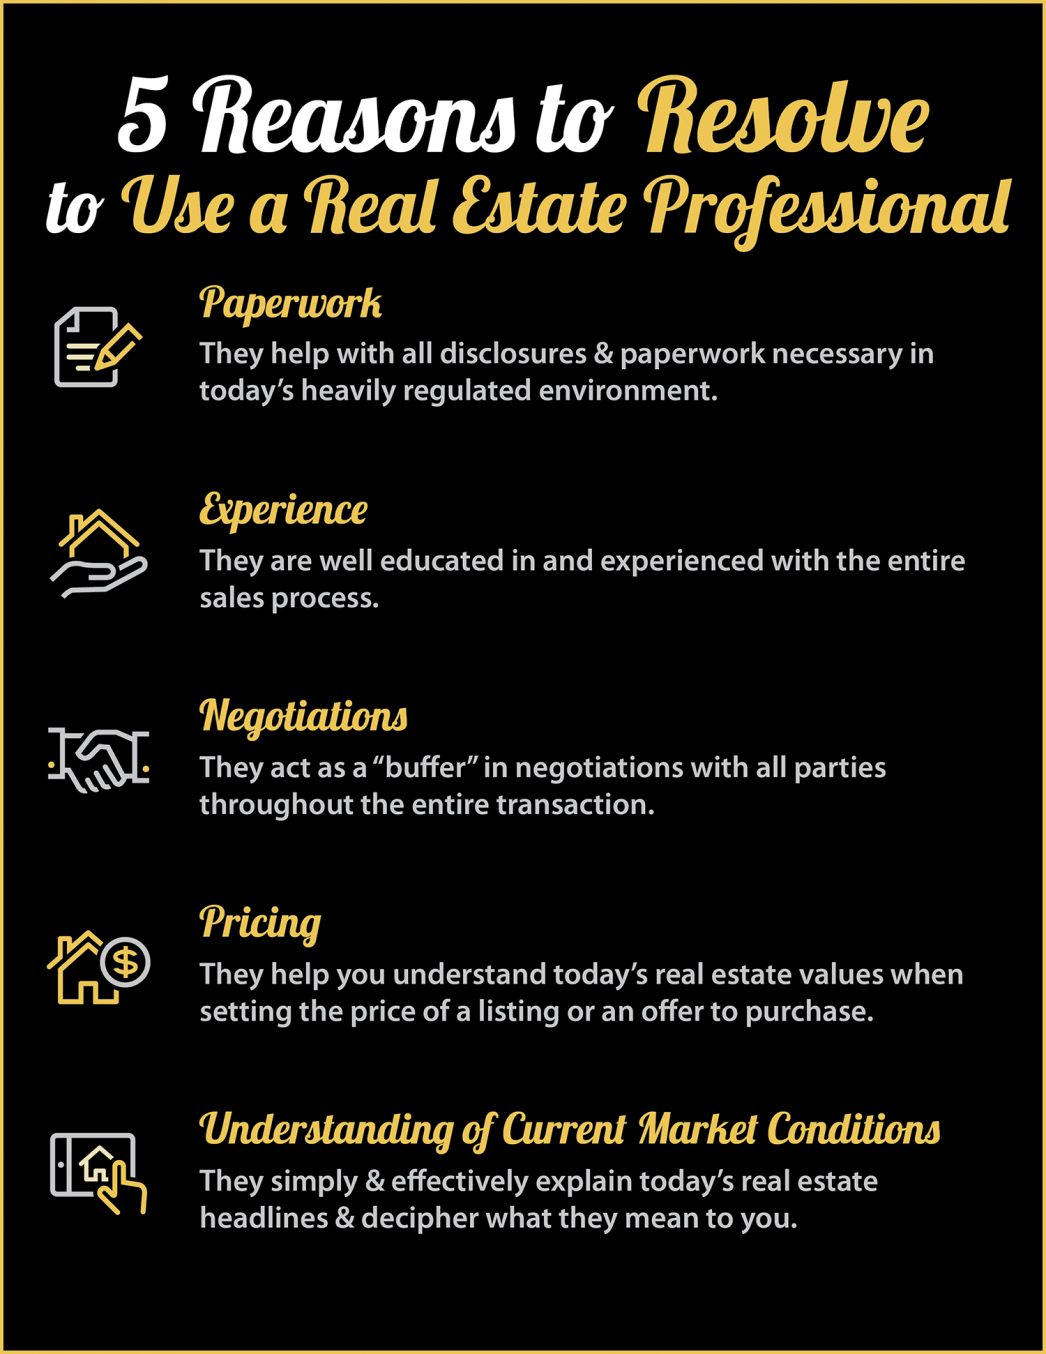 5 Reasons to Resolve to Hire a Real Estate Professional [INFOGRAPHIC] | MyKCM